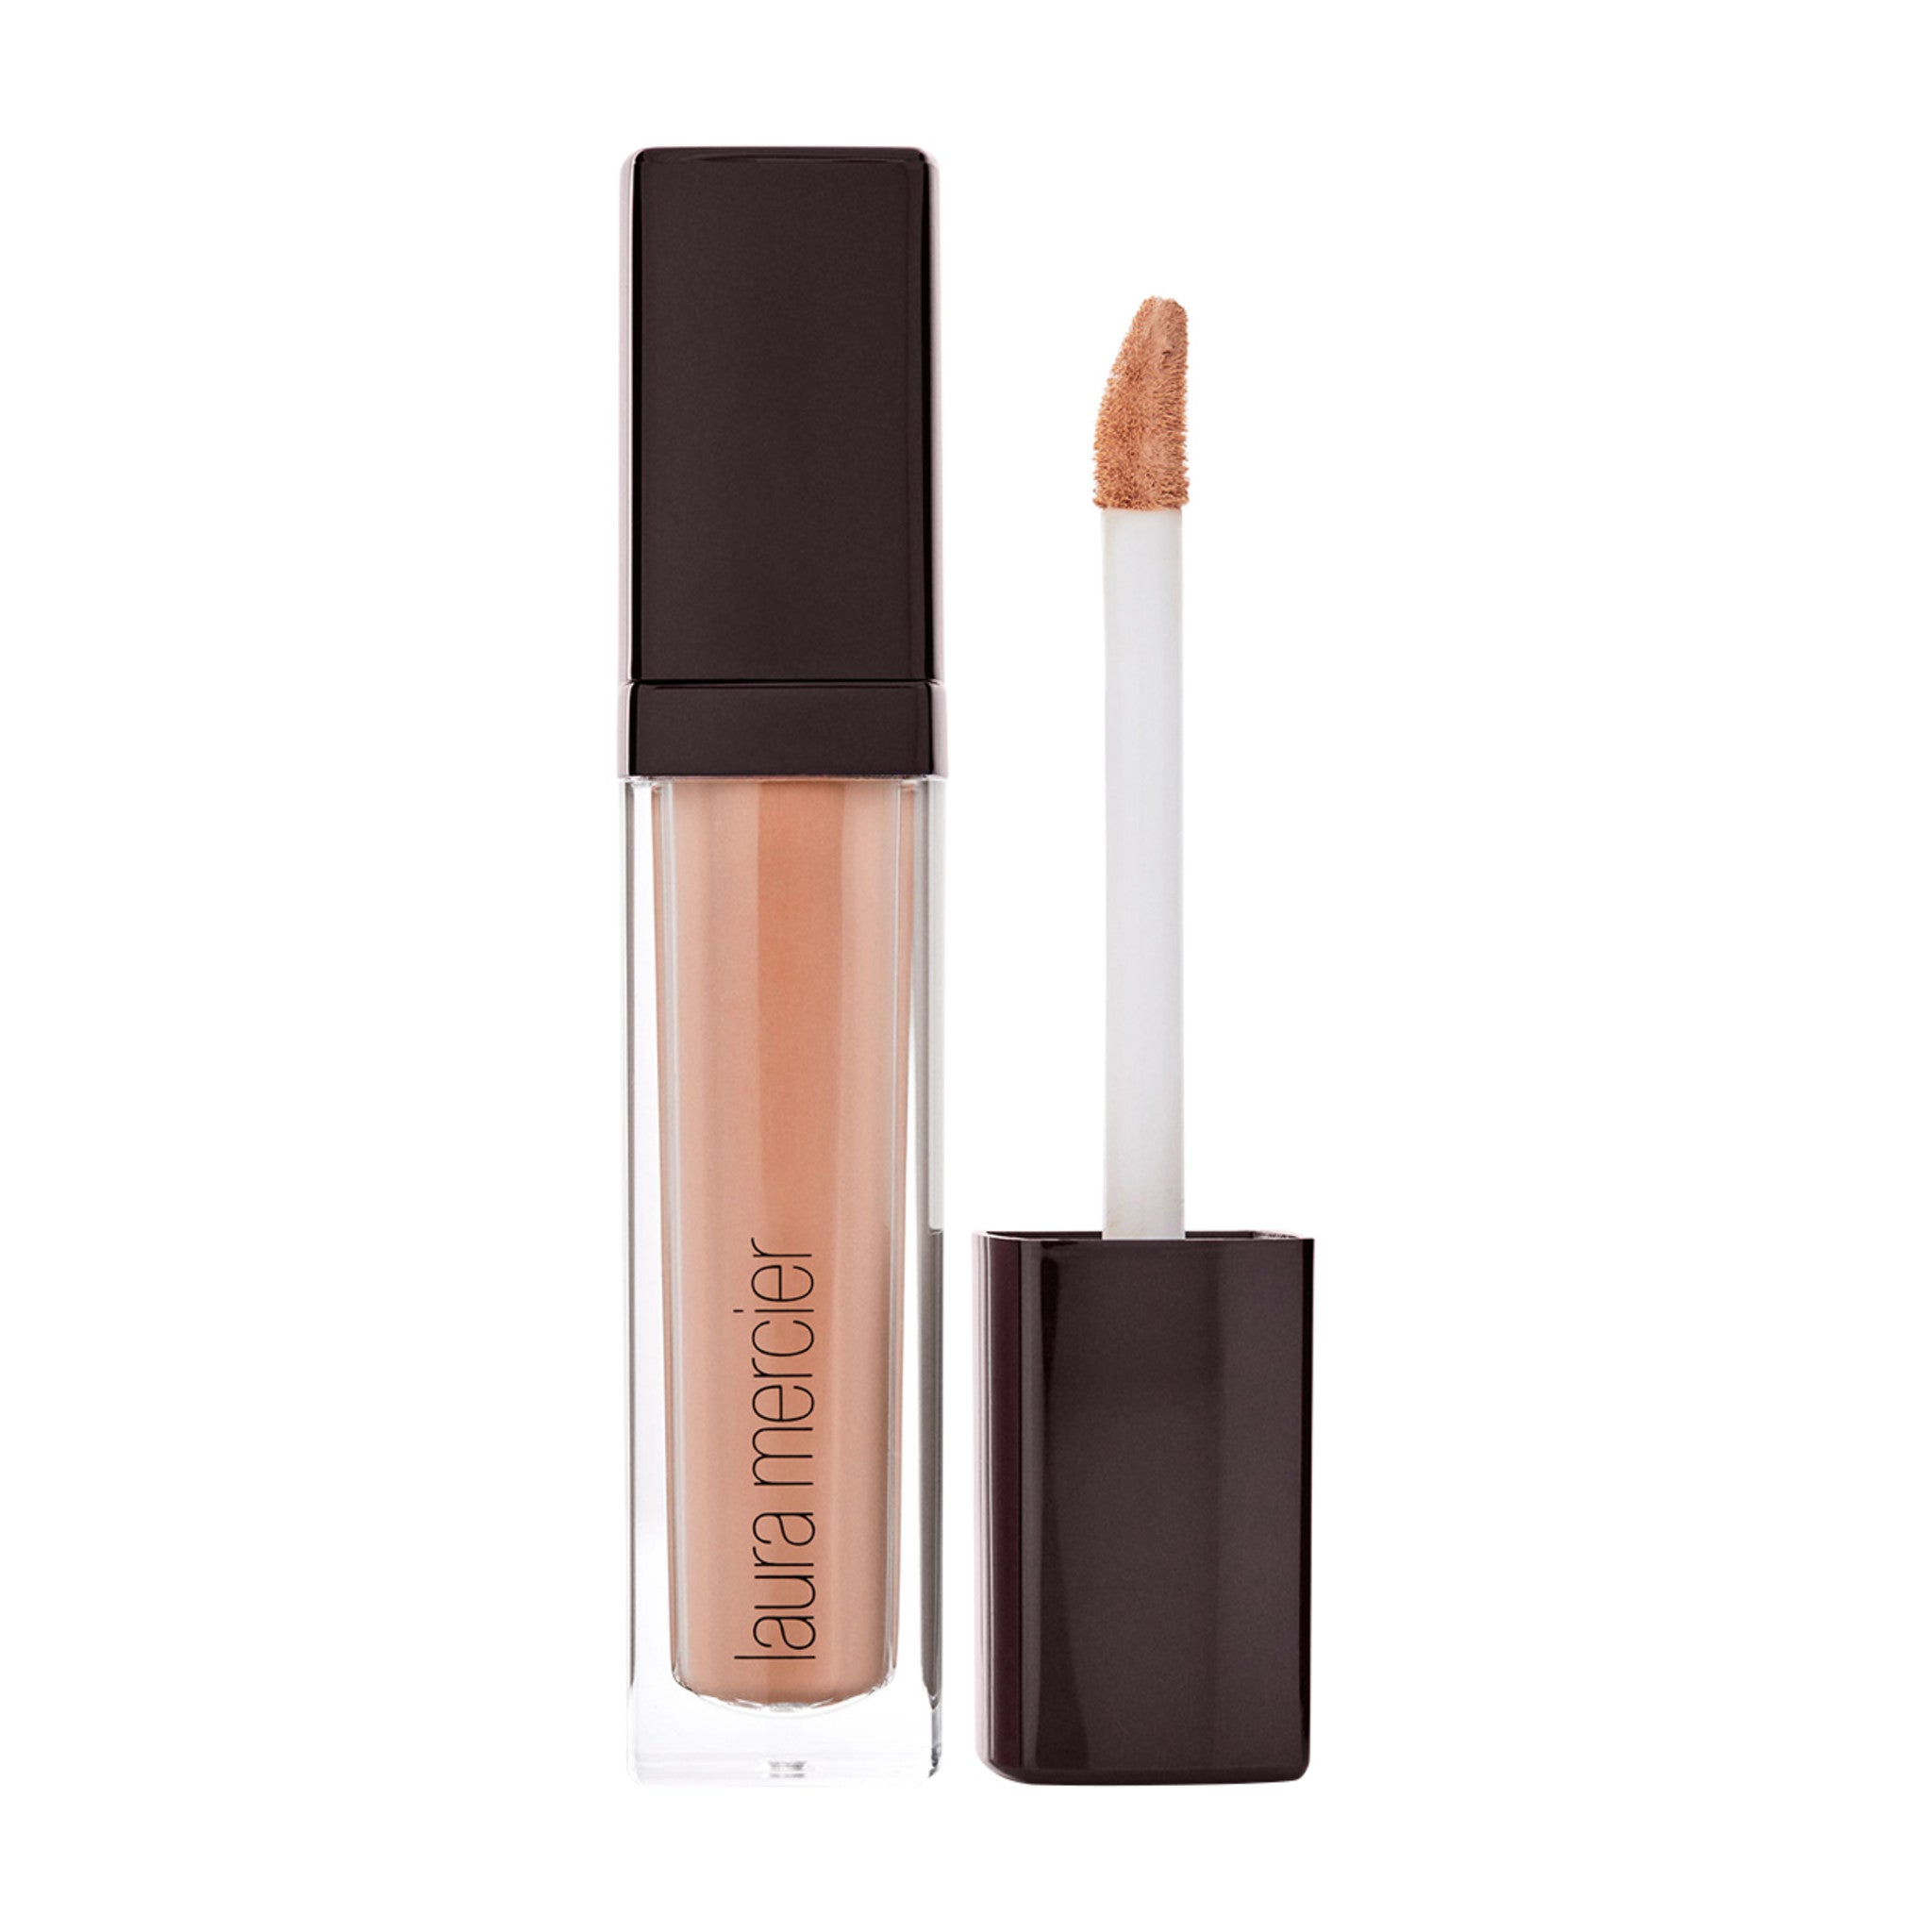 Laura Mercier Eye Basics Color/Shade variant: Wheat main image. This product is in the color pink